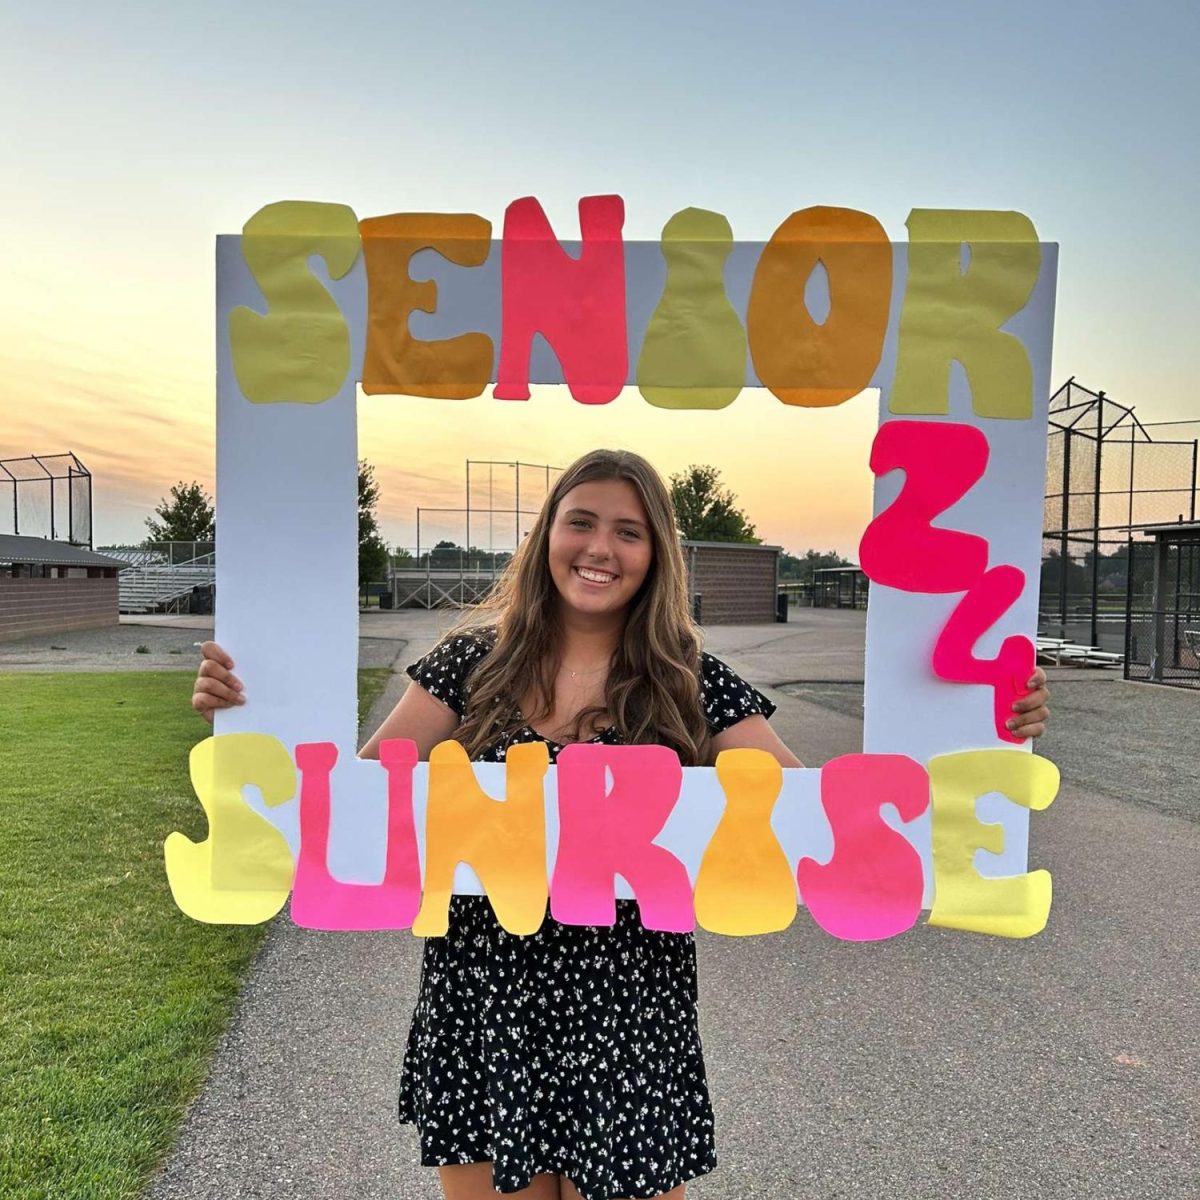 Tatum+smiles+at+the+camera+on+her+last+first+day+of+high+school+during+the+senior+sunrise.+Her+bright+smile+welcomes+all+as+she+reveals+joy%2C+warmth%2C+and+happiness.+Tatum+has+many+goals+to+accomplish+and+she+is+already+paving+her+path+towards+success+one+step+at+a+time.